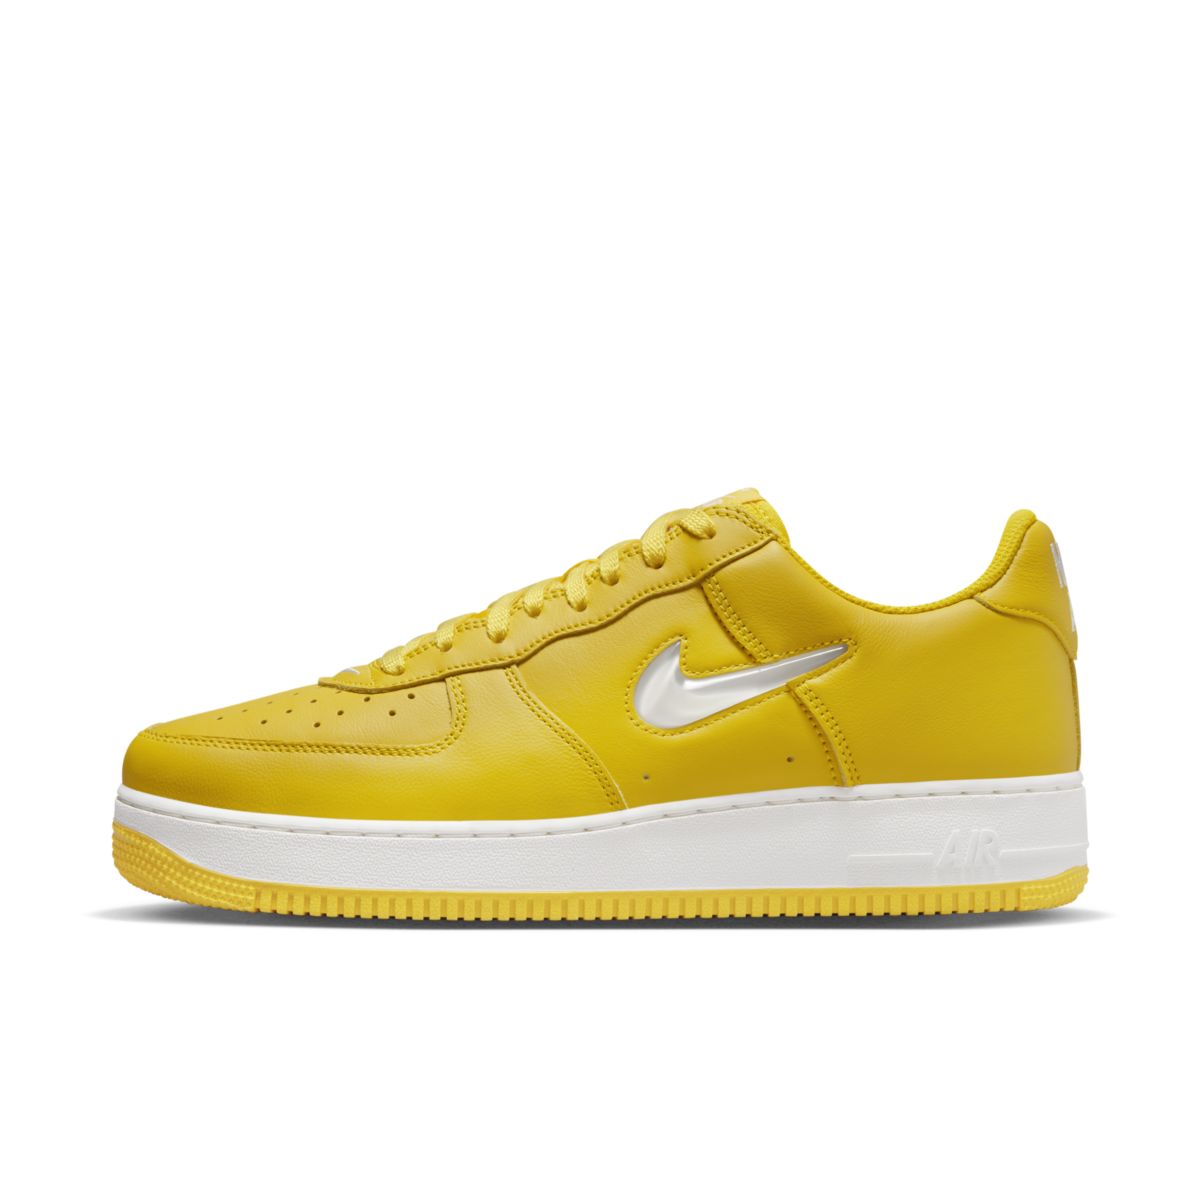 Nike Air Force 1 Low Yellow Jewel Color of the Month FJ1044-700 2